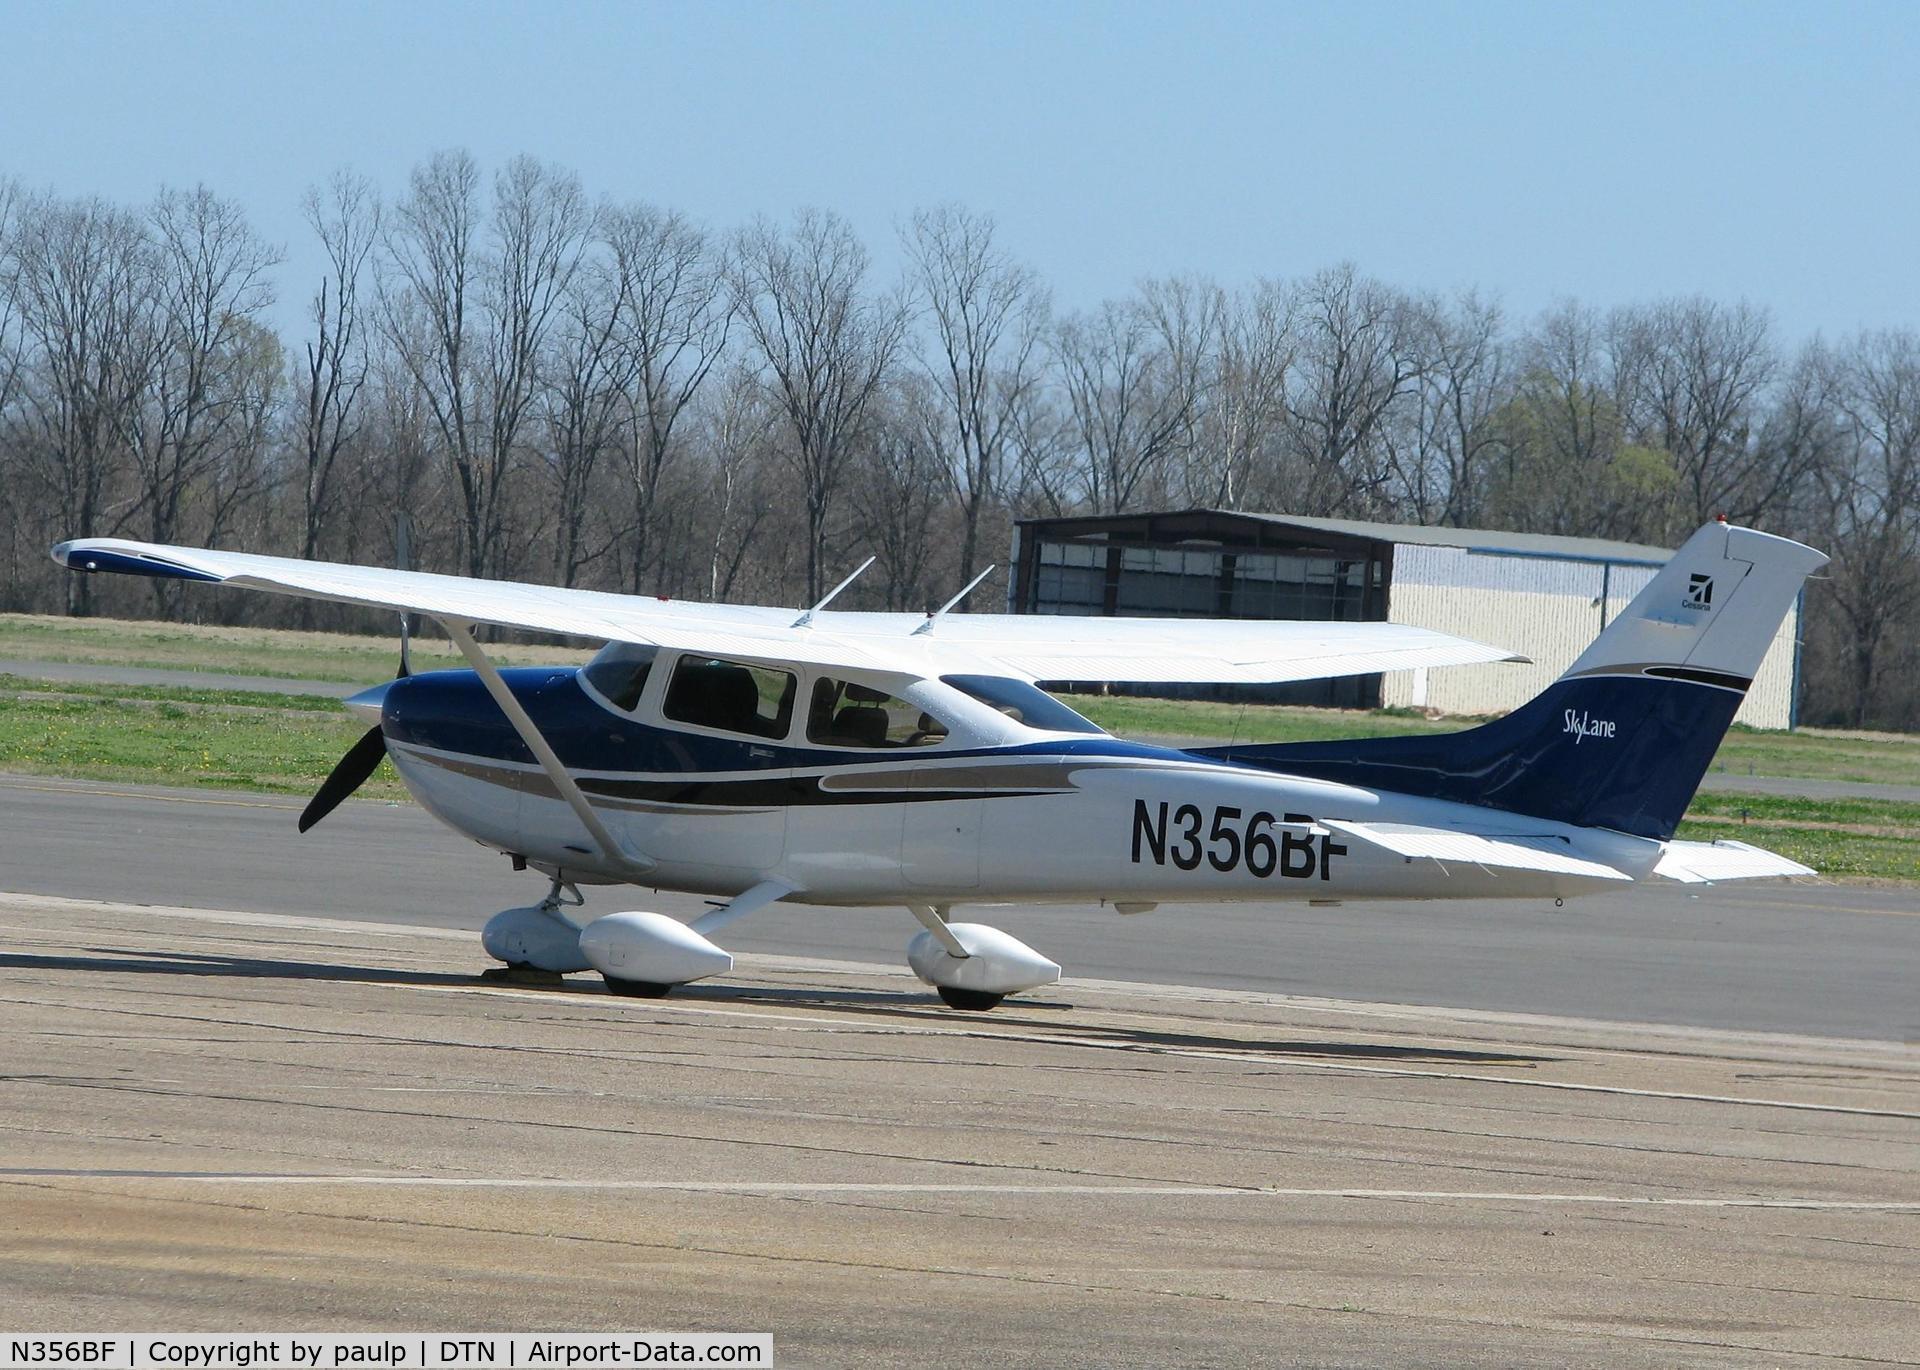 N356BF, 2004 Cessna 182T Skylane C/N 18281392, Parked at the Shreveport Downtown airport.